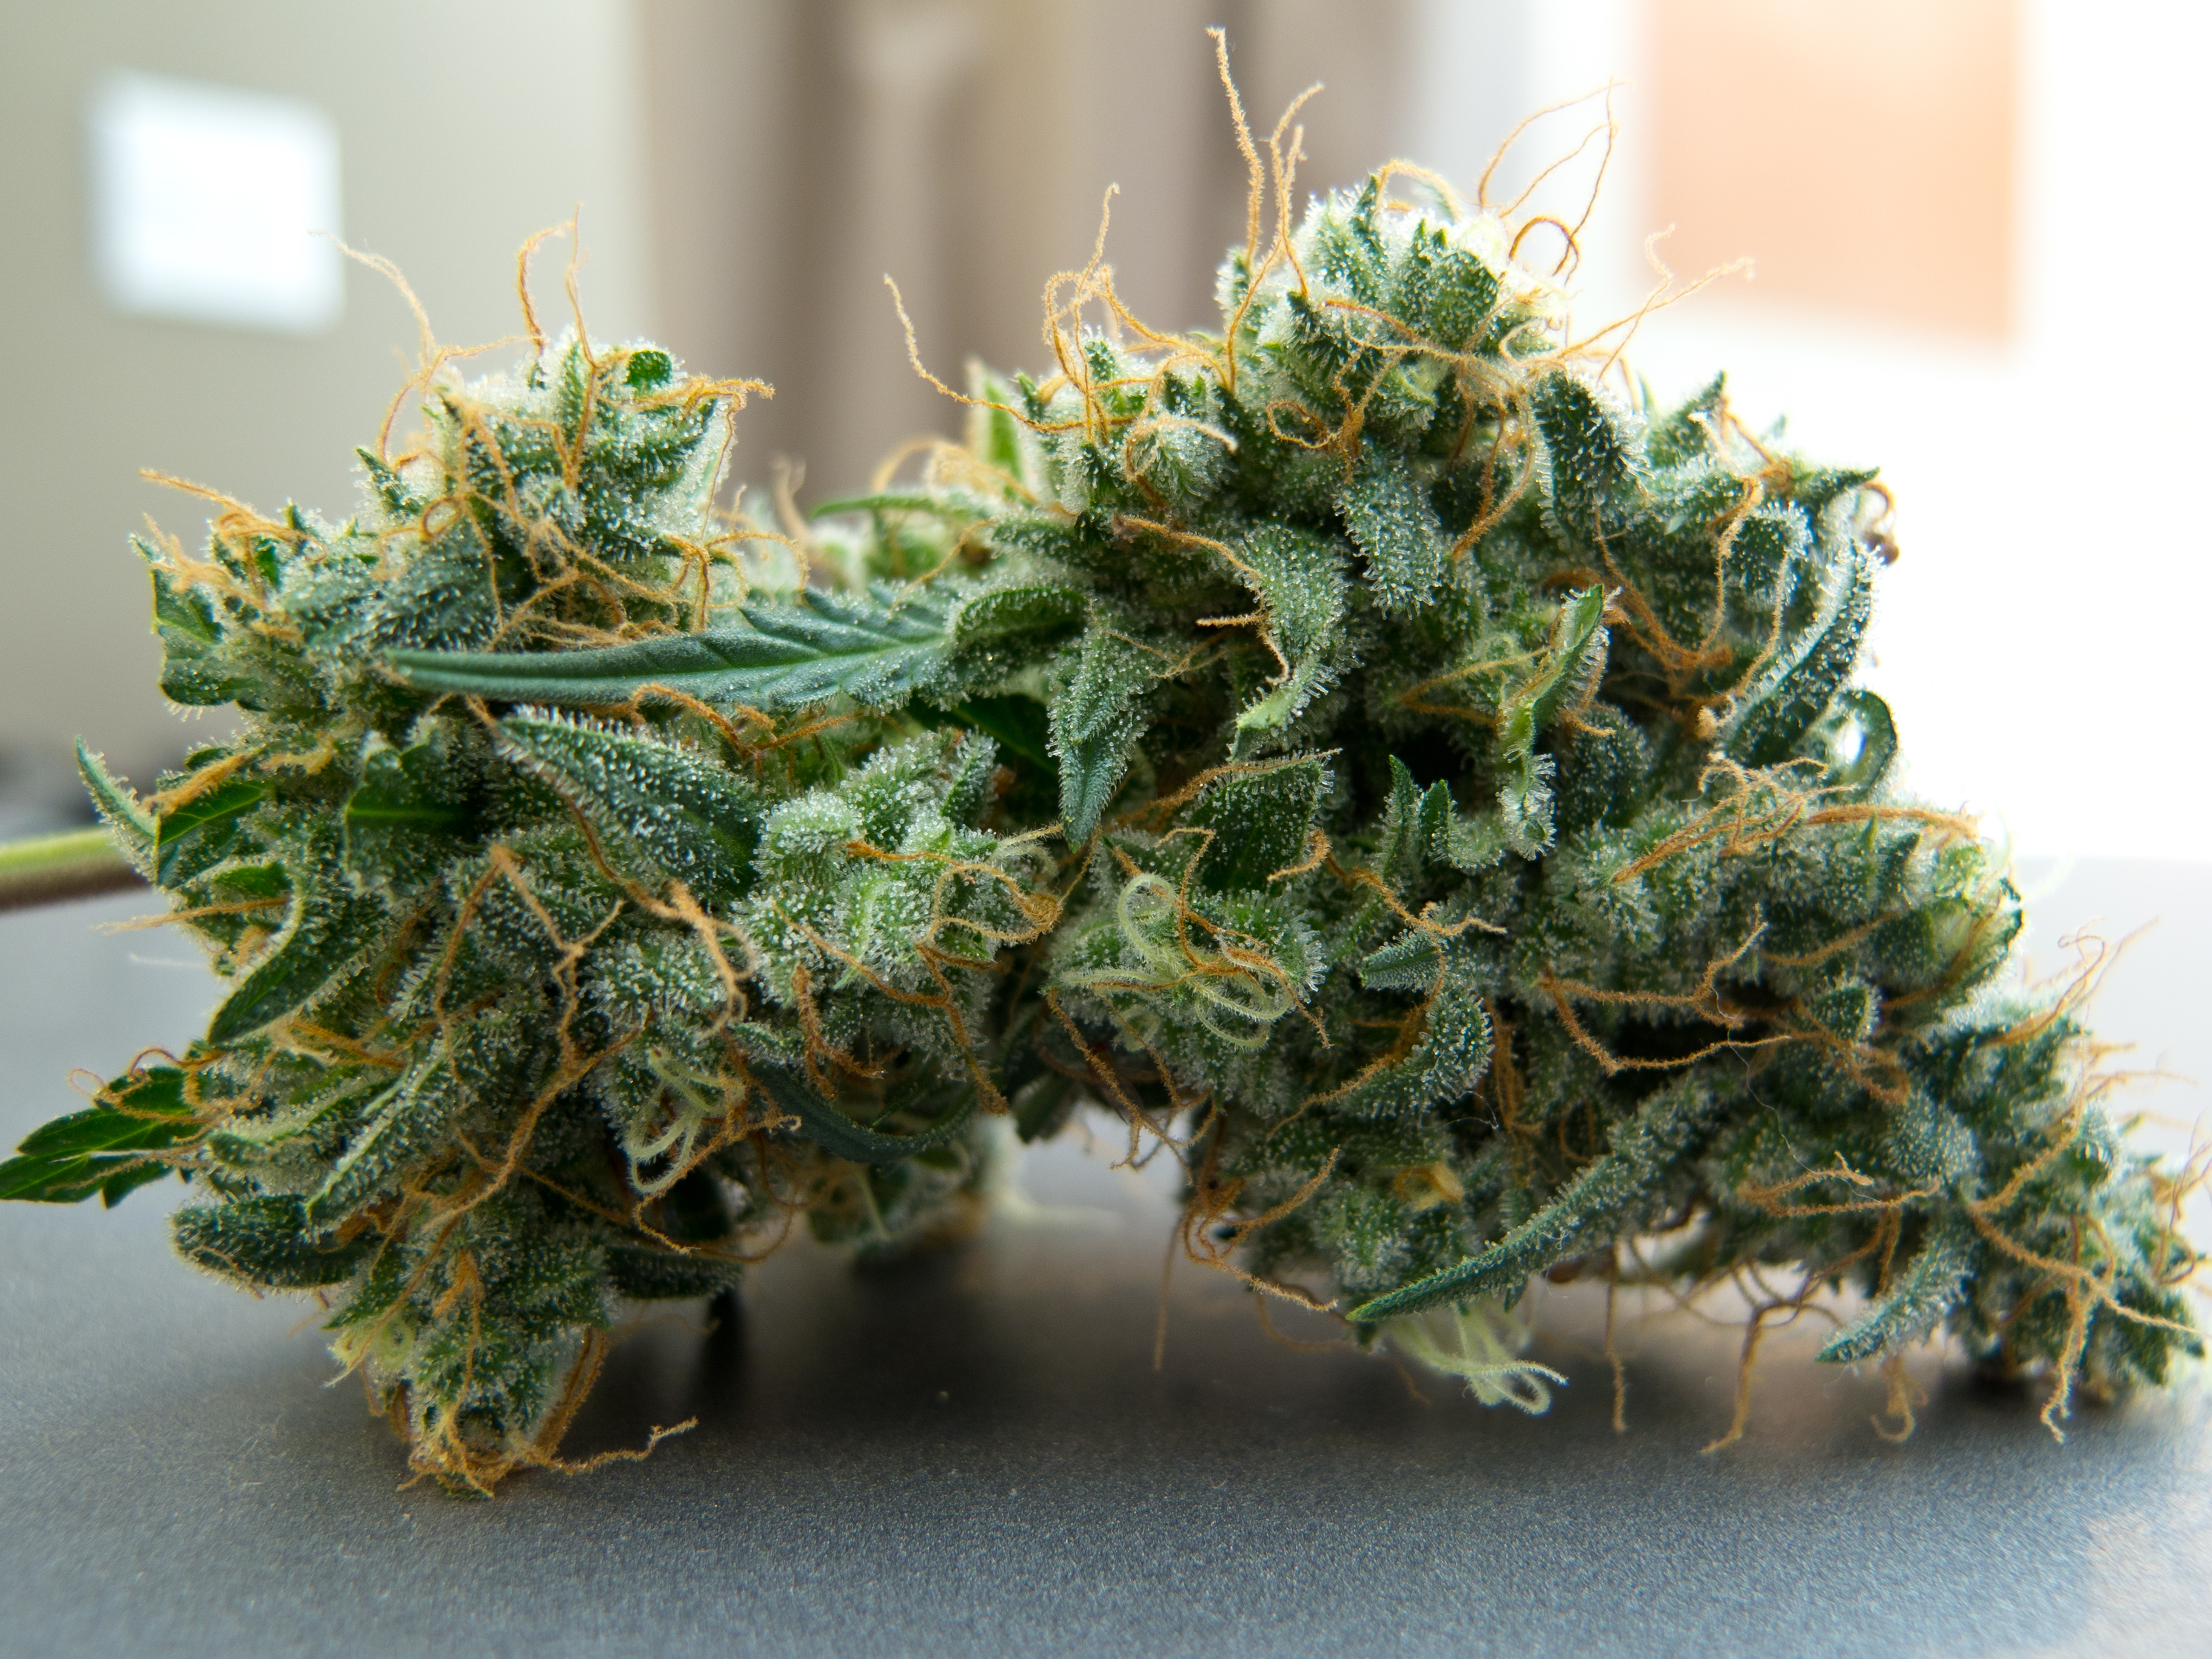 Cant dry buds slow | Grasscity Forums - The #1 Marijuana Community Online
